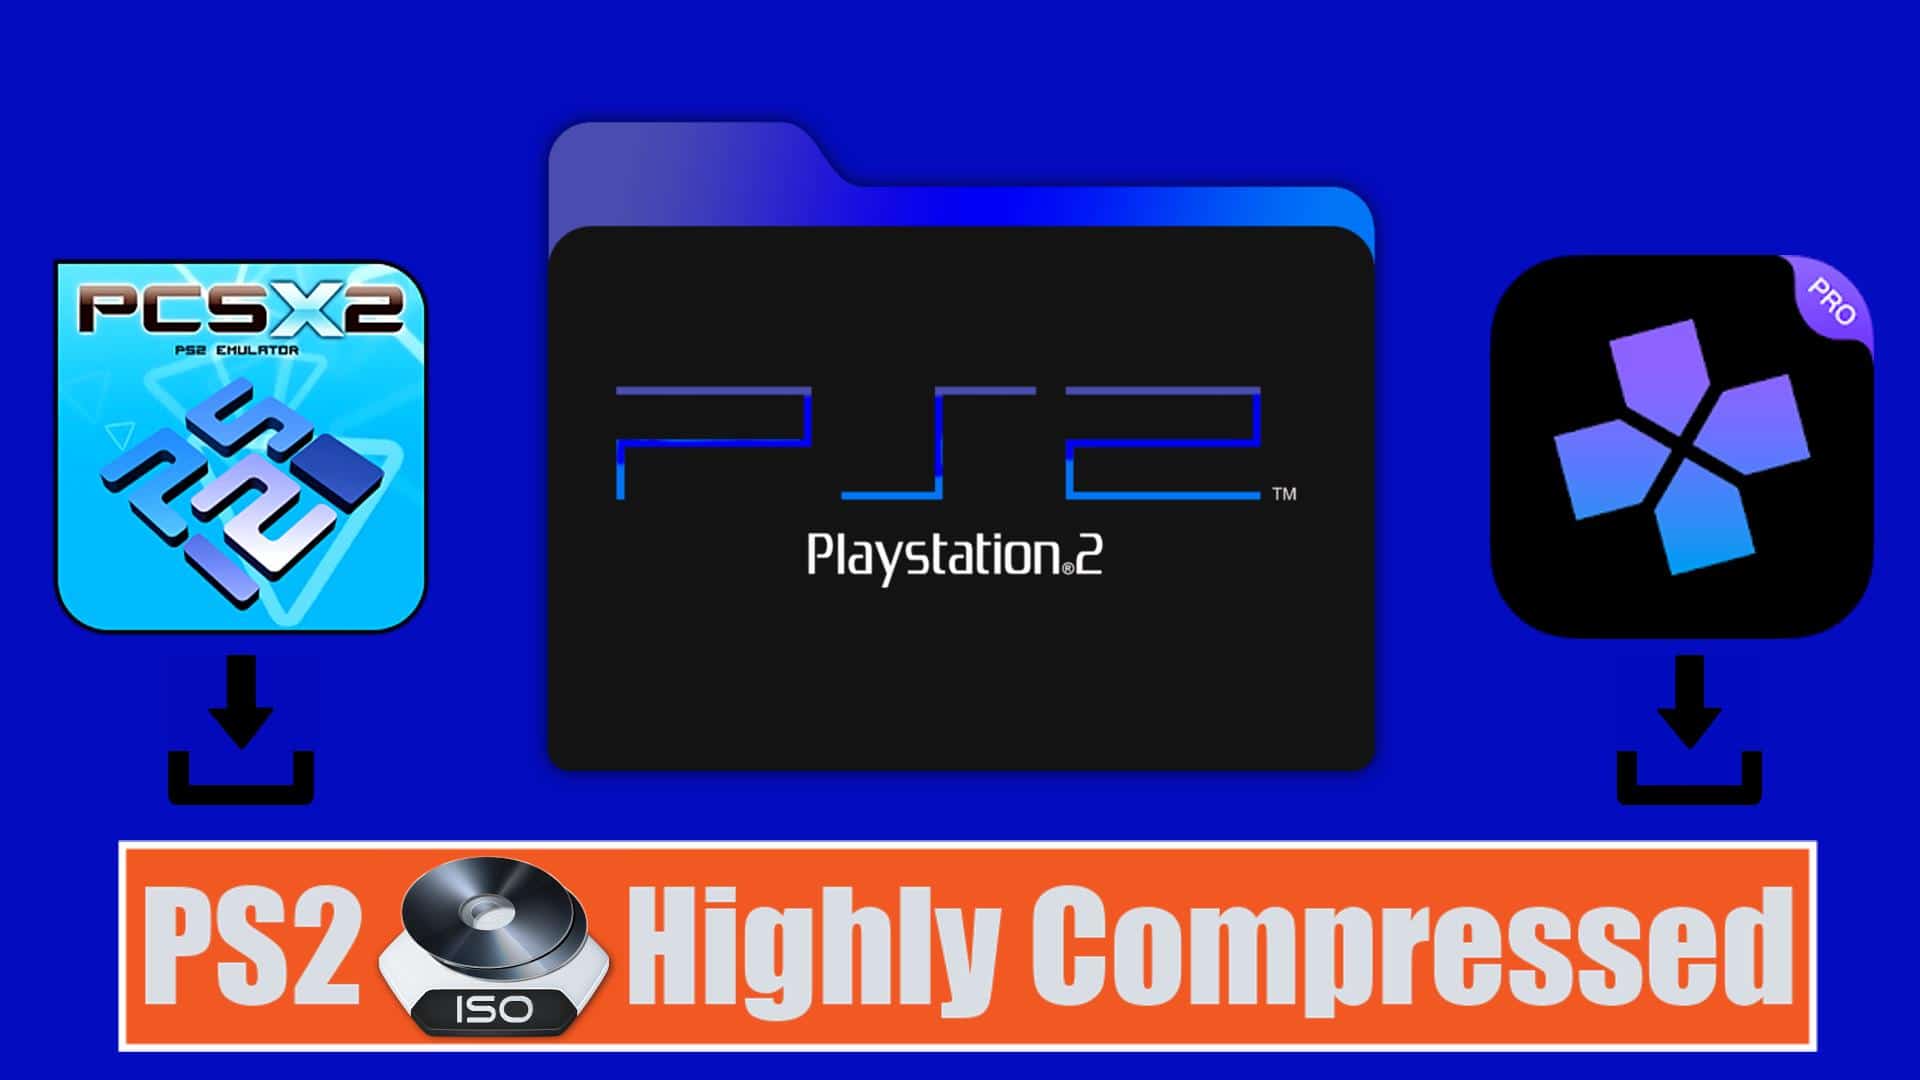 PS2 ISO Highly Compressed Games Download (Collection) - SafeROMs